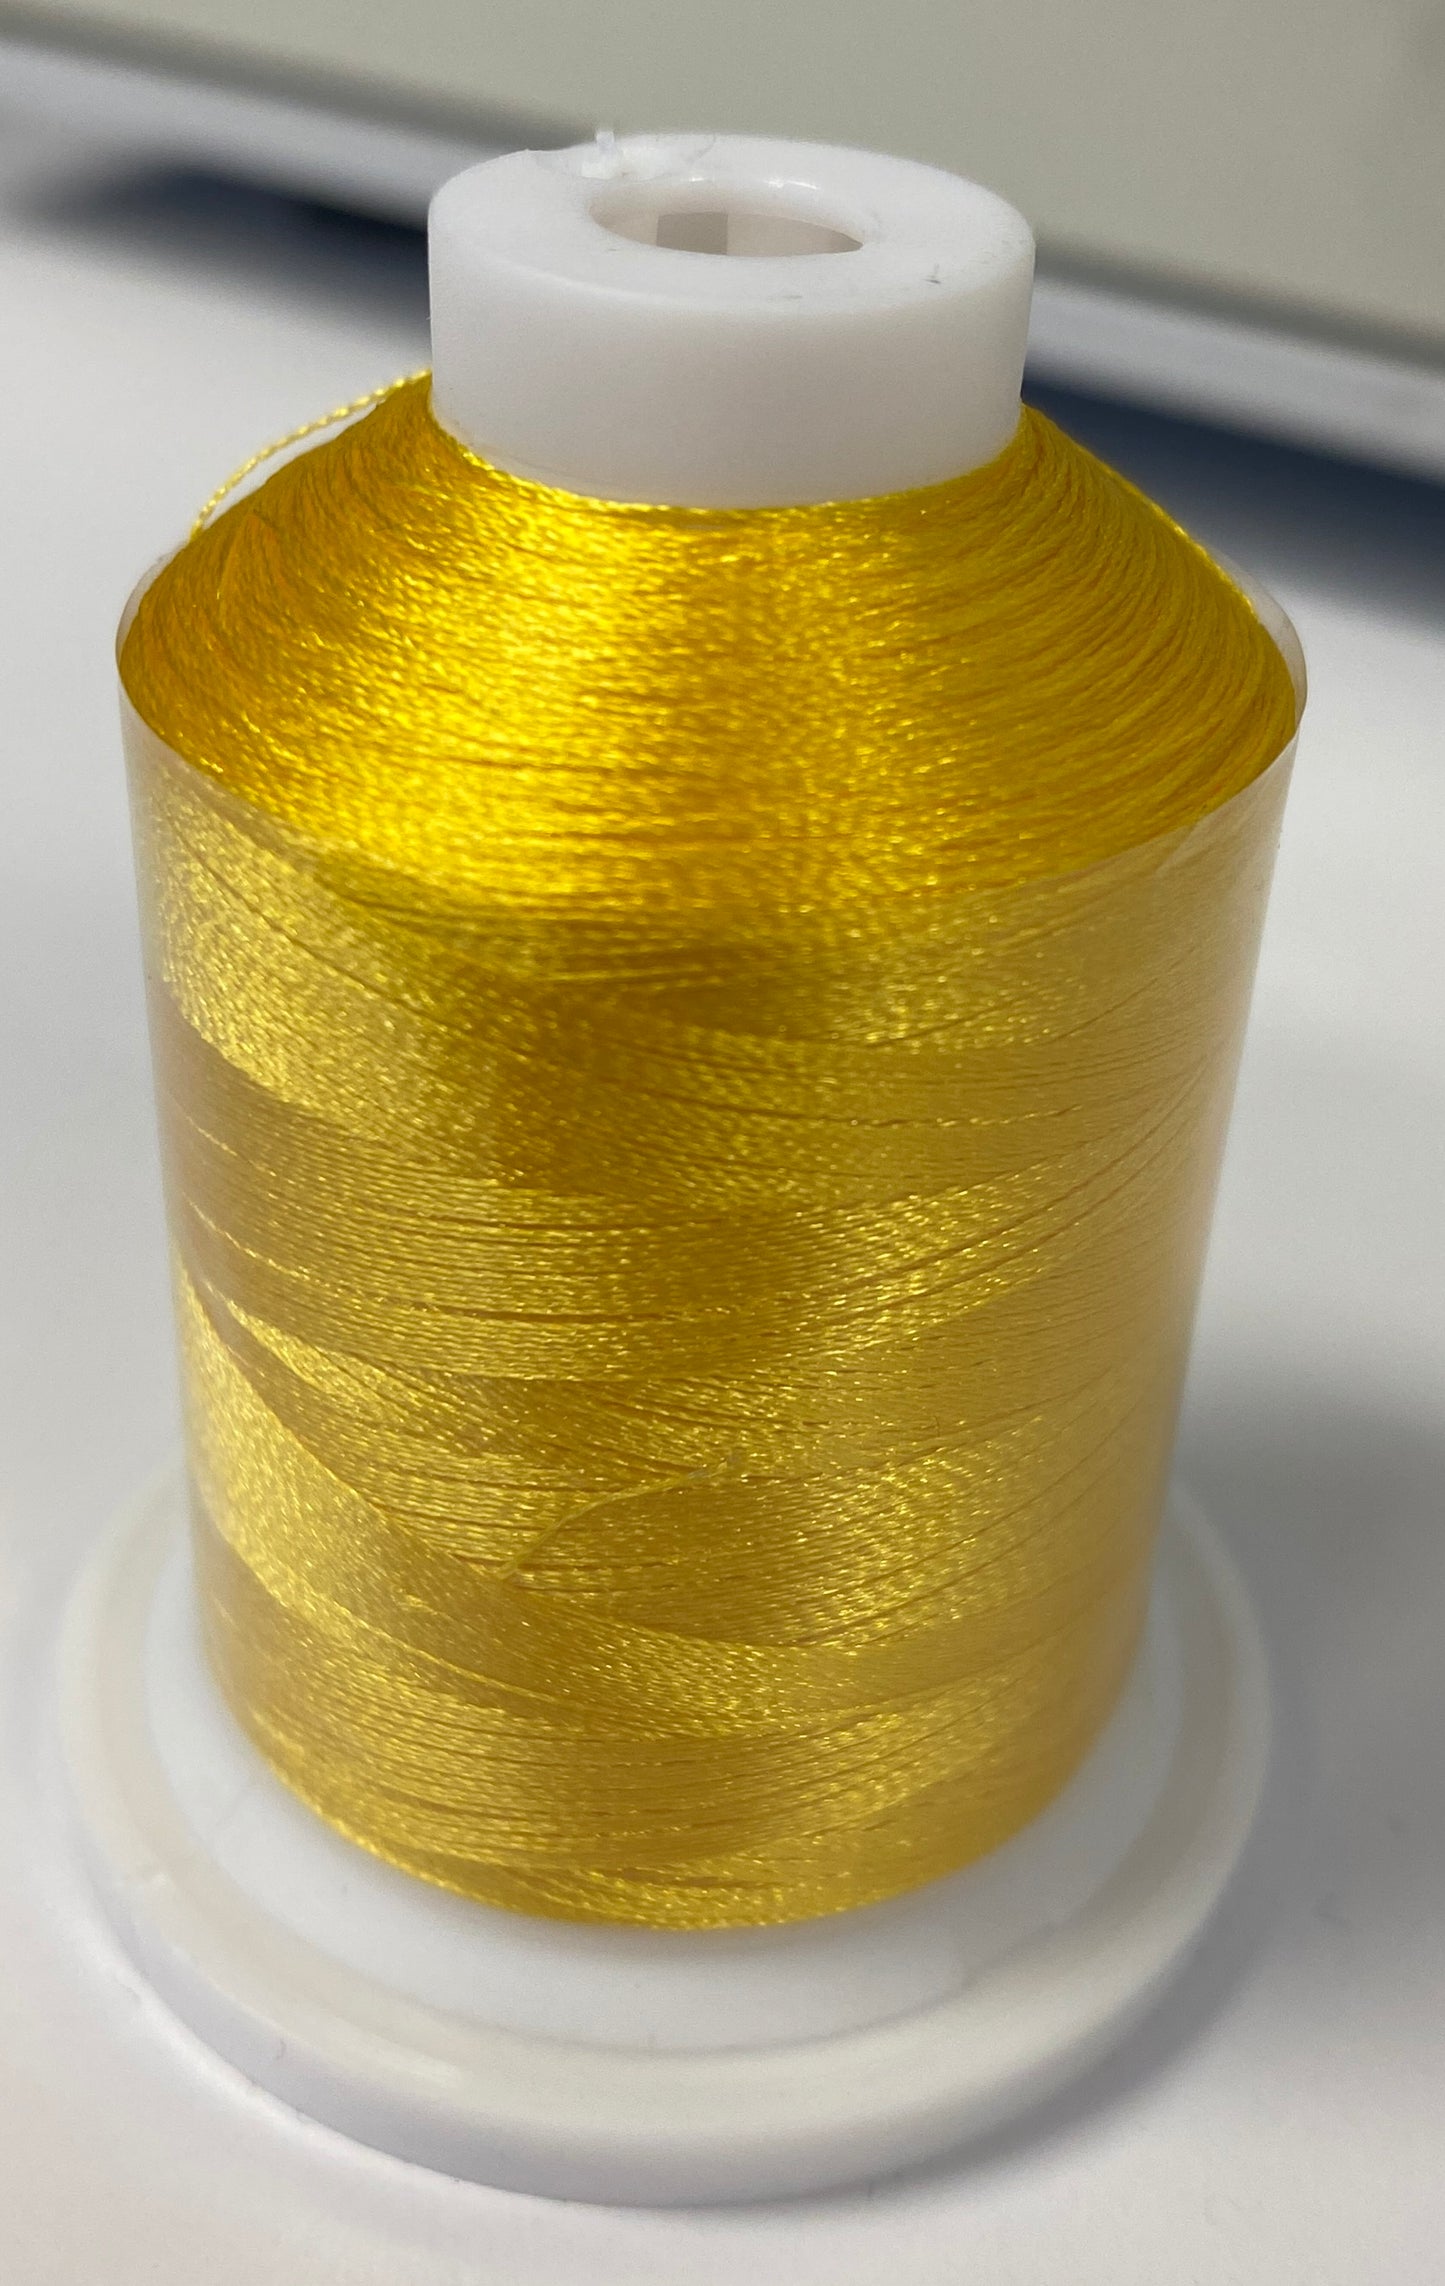 Brother Pacesetter Embroidery Thread Yellows